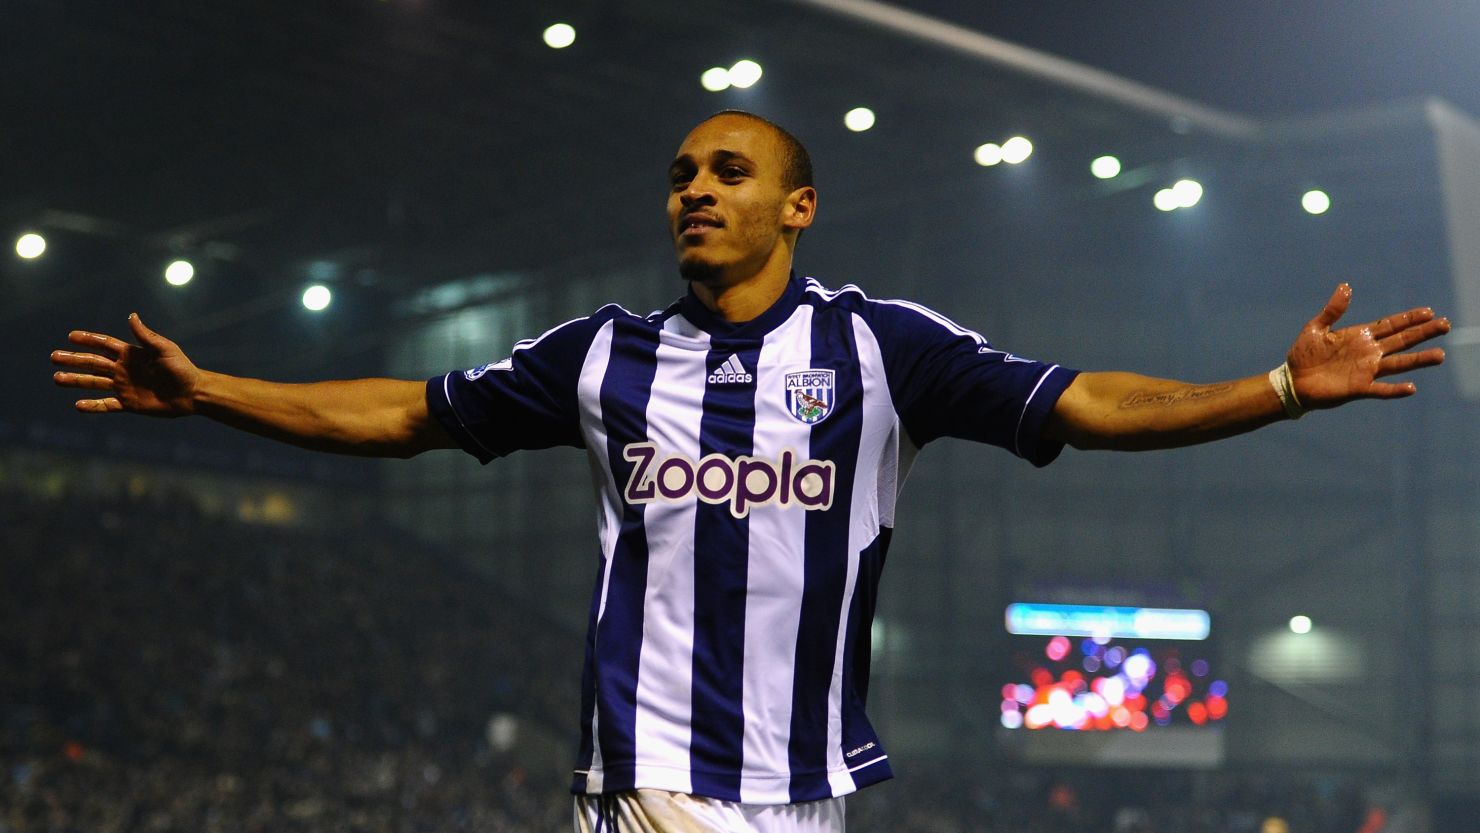 Nigerian striker Peter Odemwingie grabbed two goals as West Bromwich Albion defeated Southampton 2-0